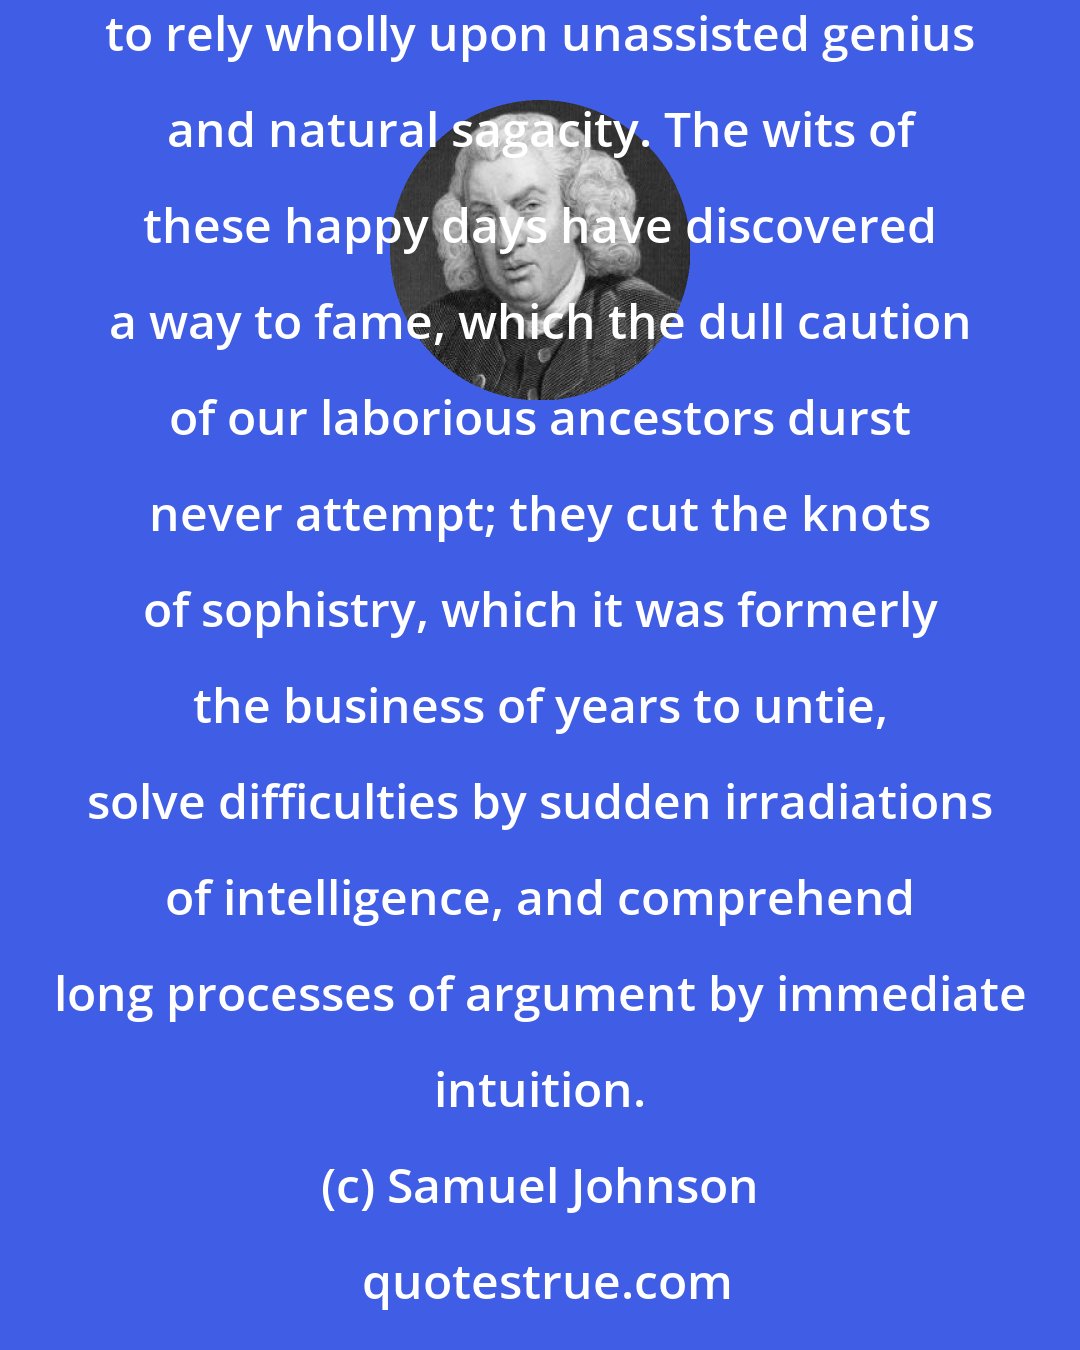 Samuel Johnson: The mental disease of the present generation is impatience of study, contempt of the great masters of ancient wisdom, and a disposition to rely wholly upon unassisted genius and natural sagacity. The wits of these happy days have discovered a way to fame, which the dull caution of our laborious ancestors durst never attempt; they cut the knots of sophistry, which it was formerly the business of years to untie, solve difficulties by sudden irradiations of intelligence, and comprehend long processes of argument by immediate intuition.